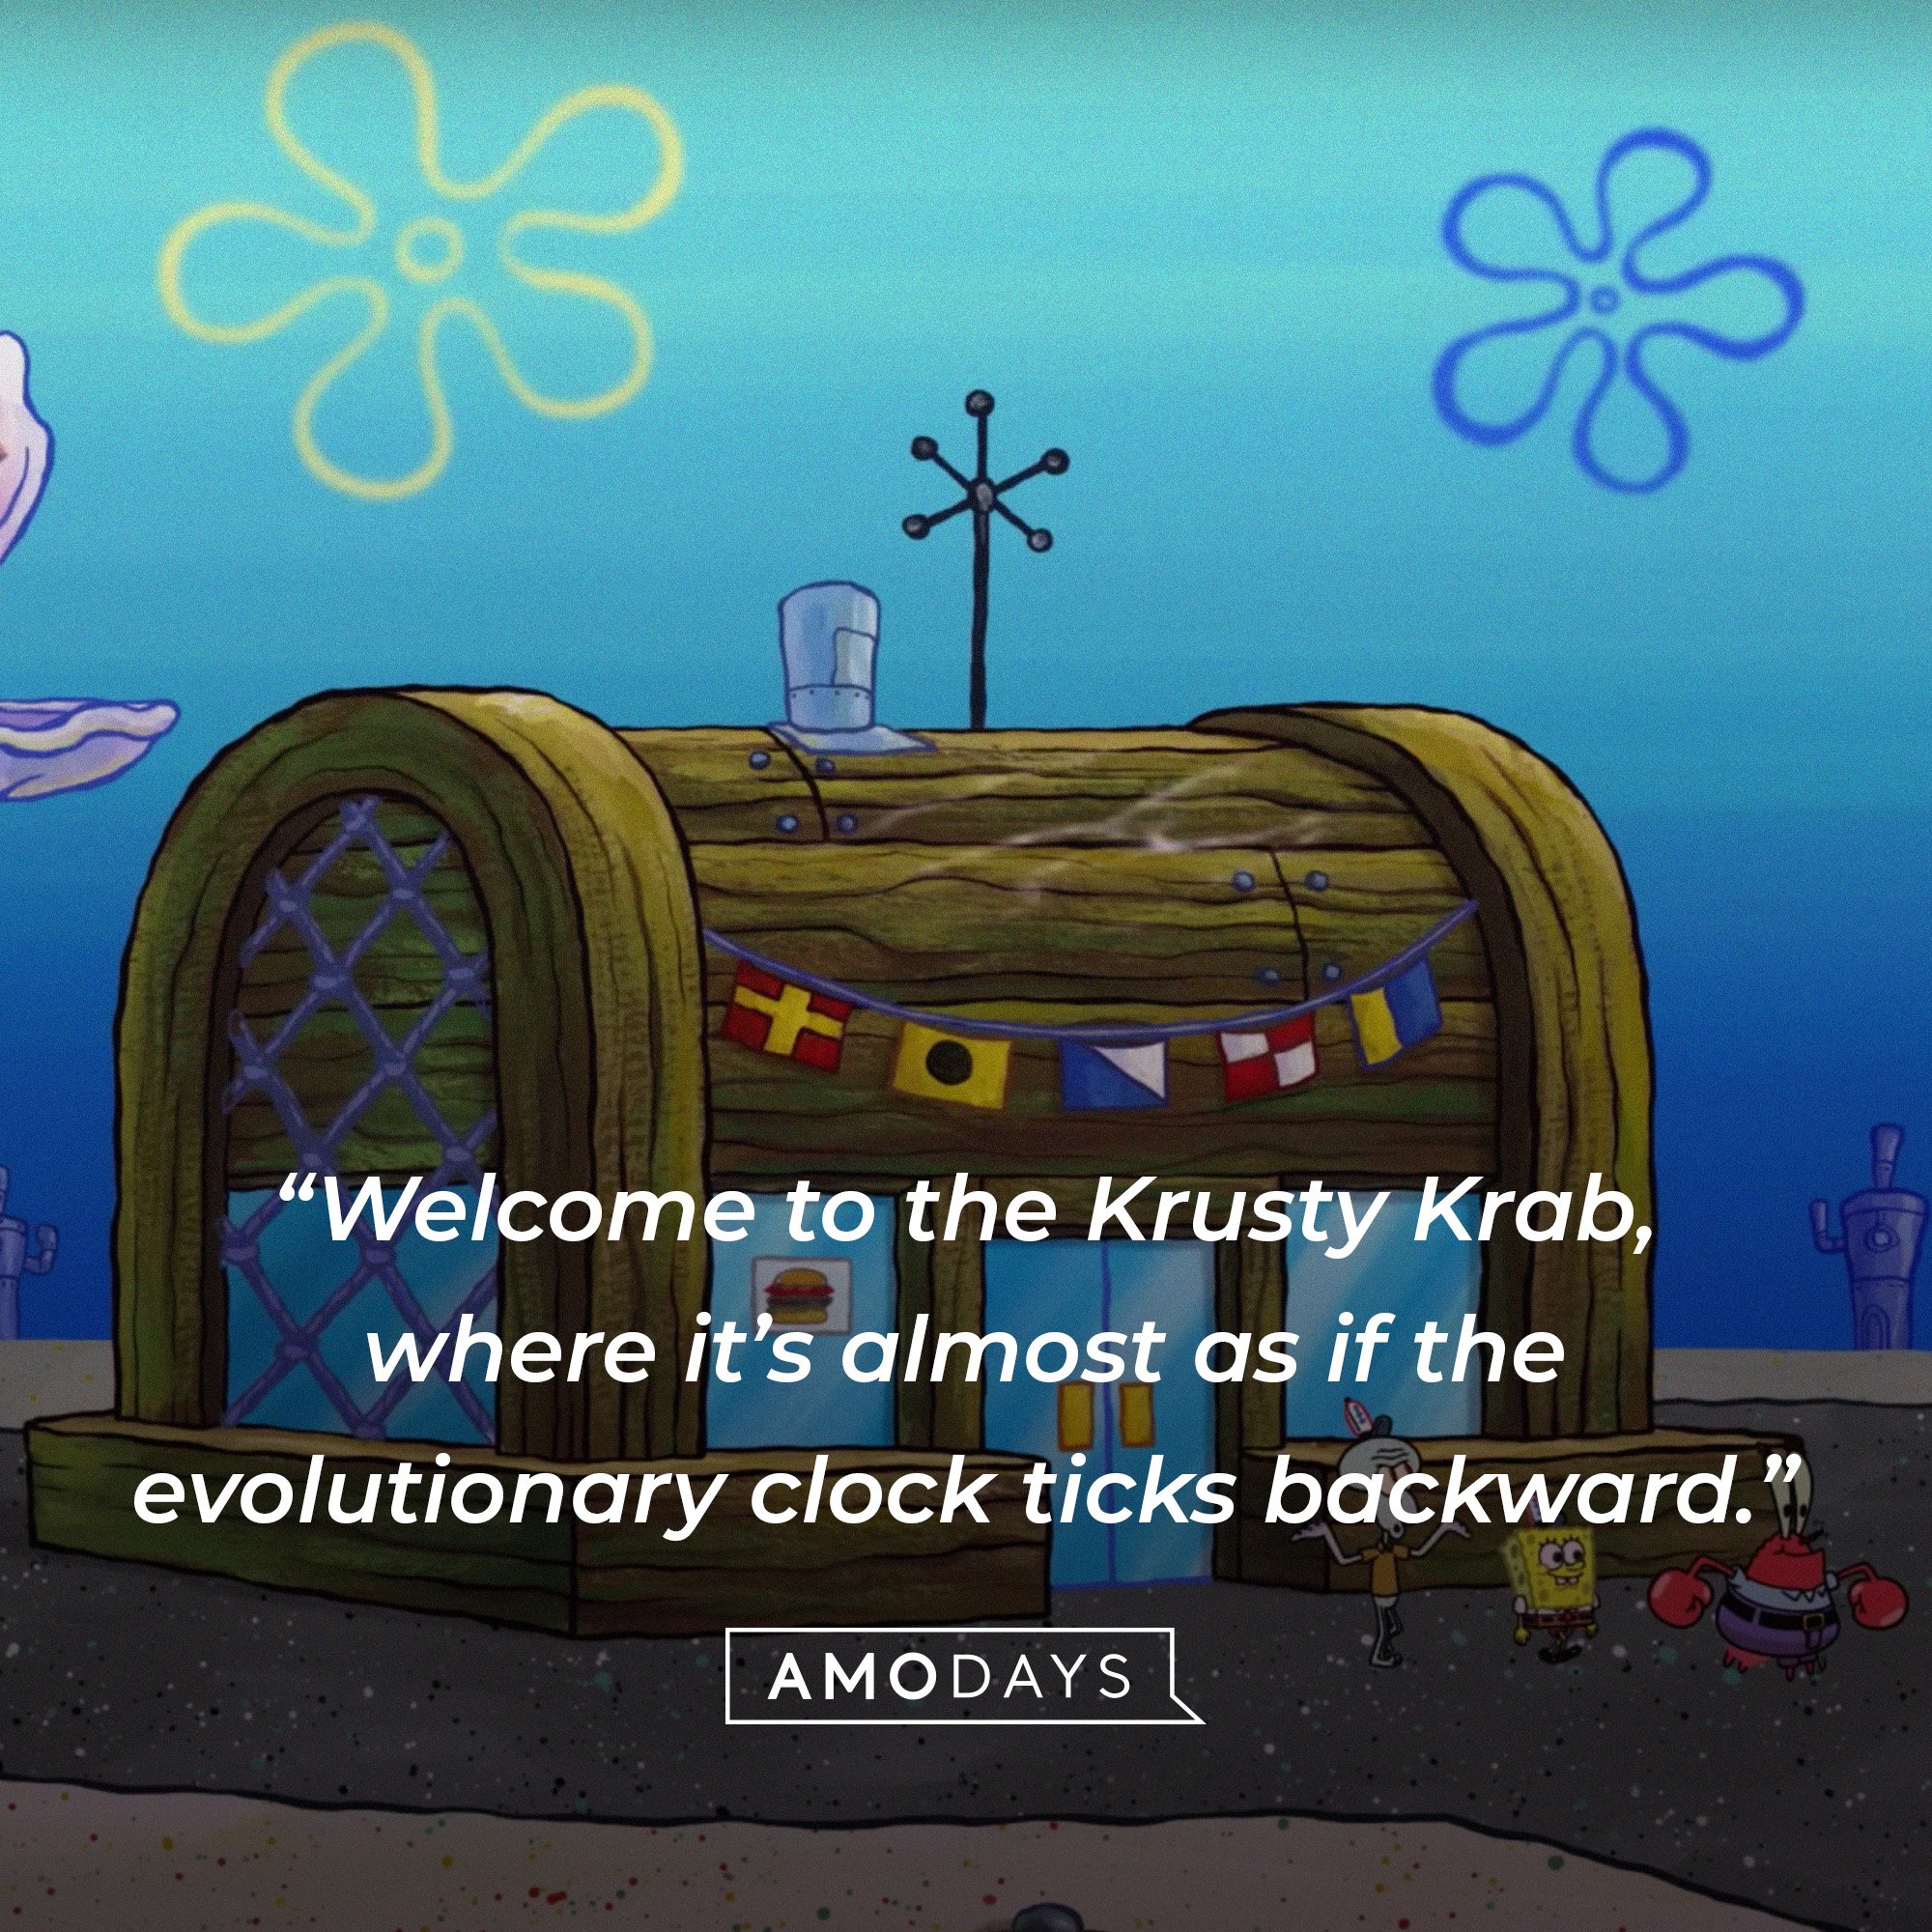 Squidward Tentacles’ quote: “Welcome to the Krusty Krab, where it’s almost as if the evolutionary clock ticks backward.”  | Source: AmoDays